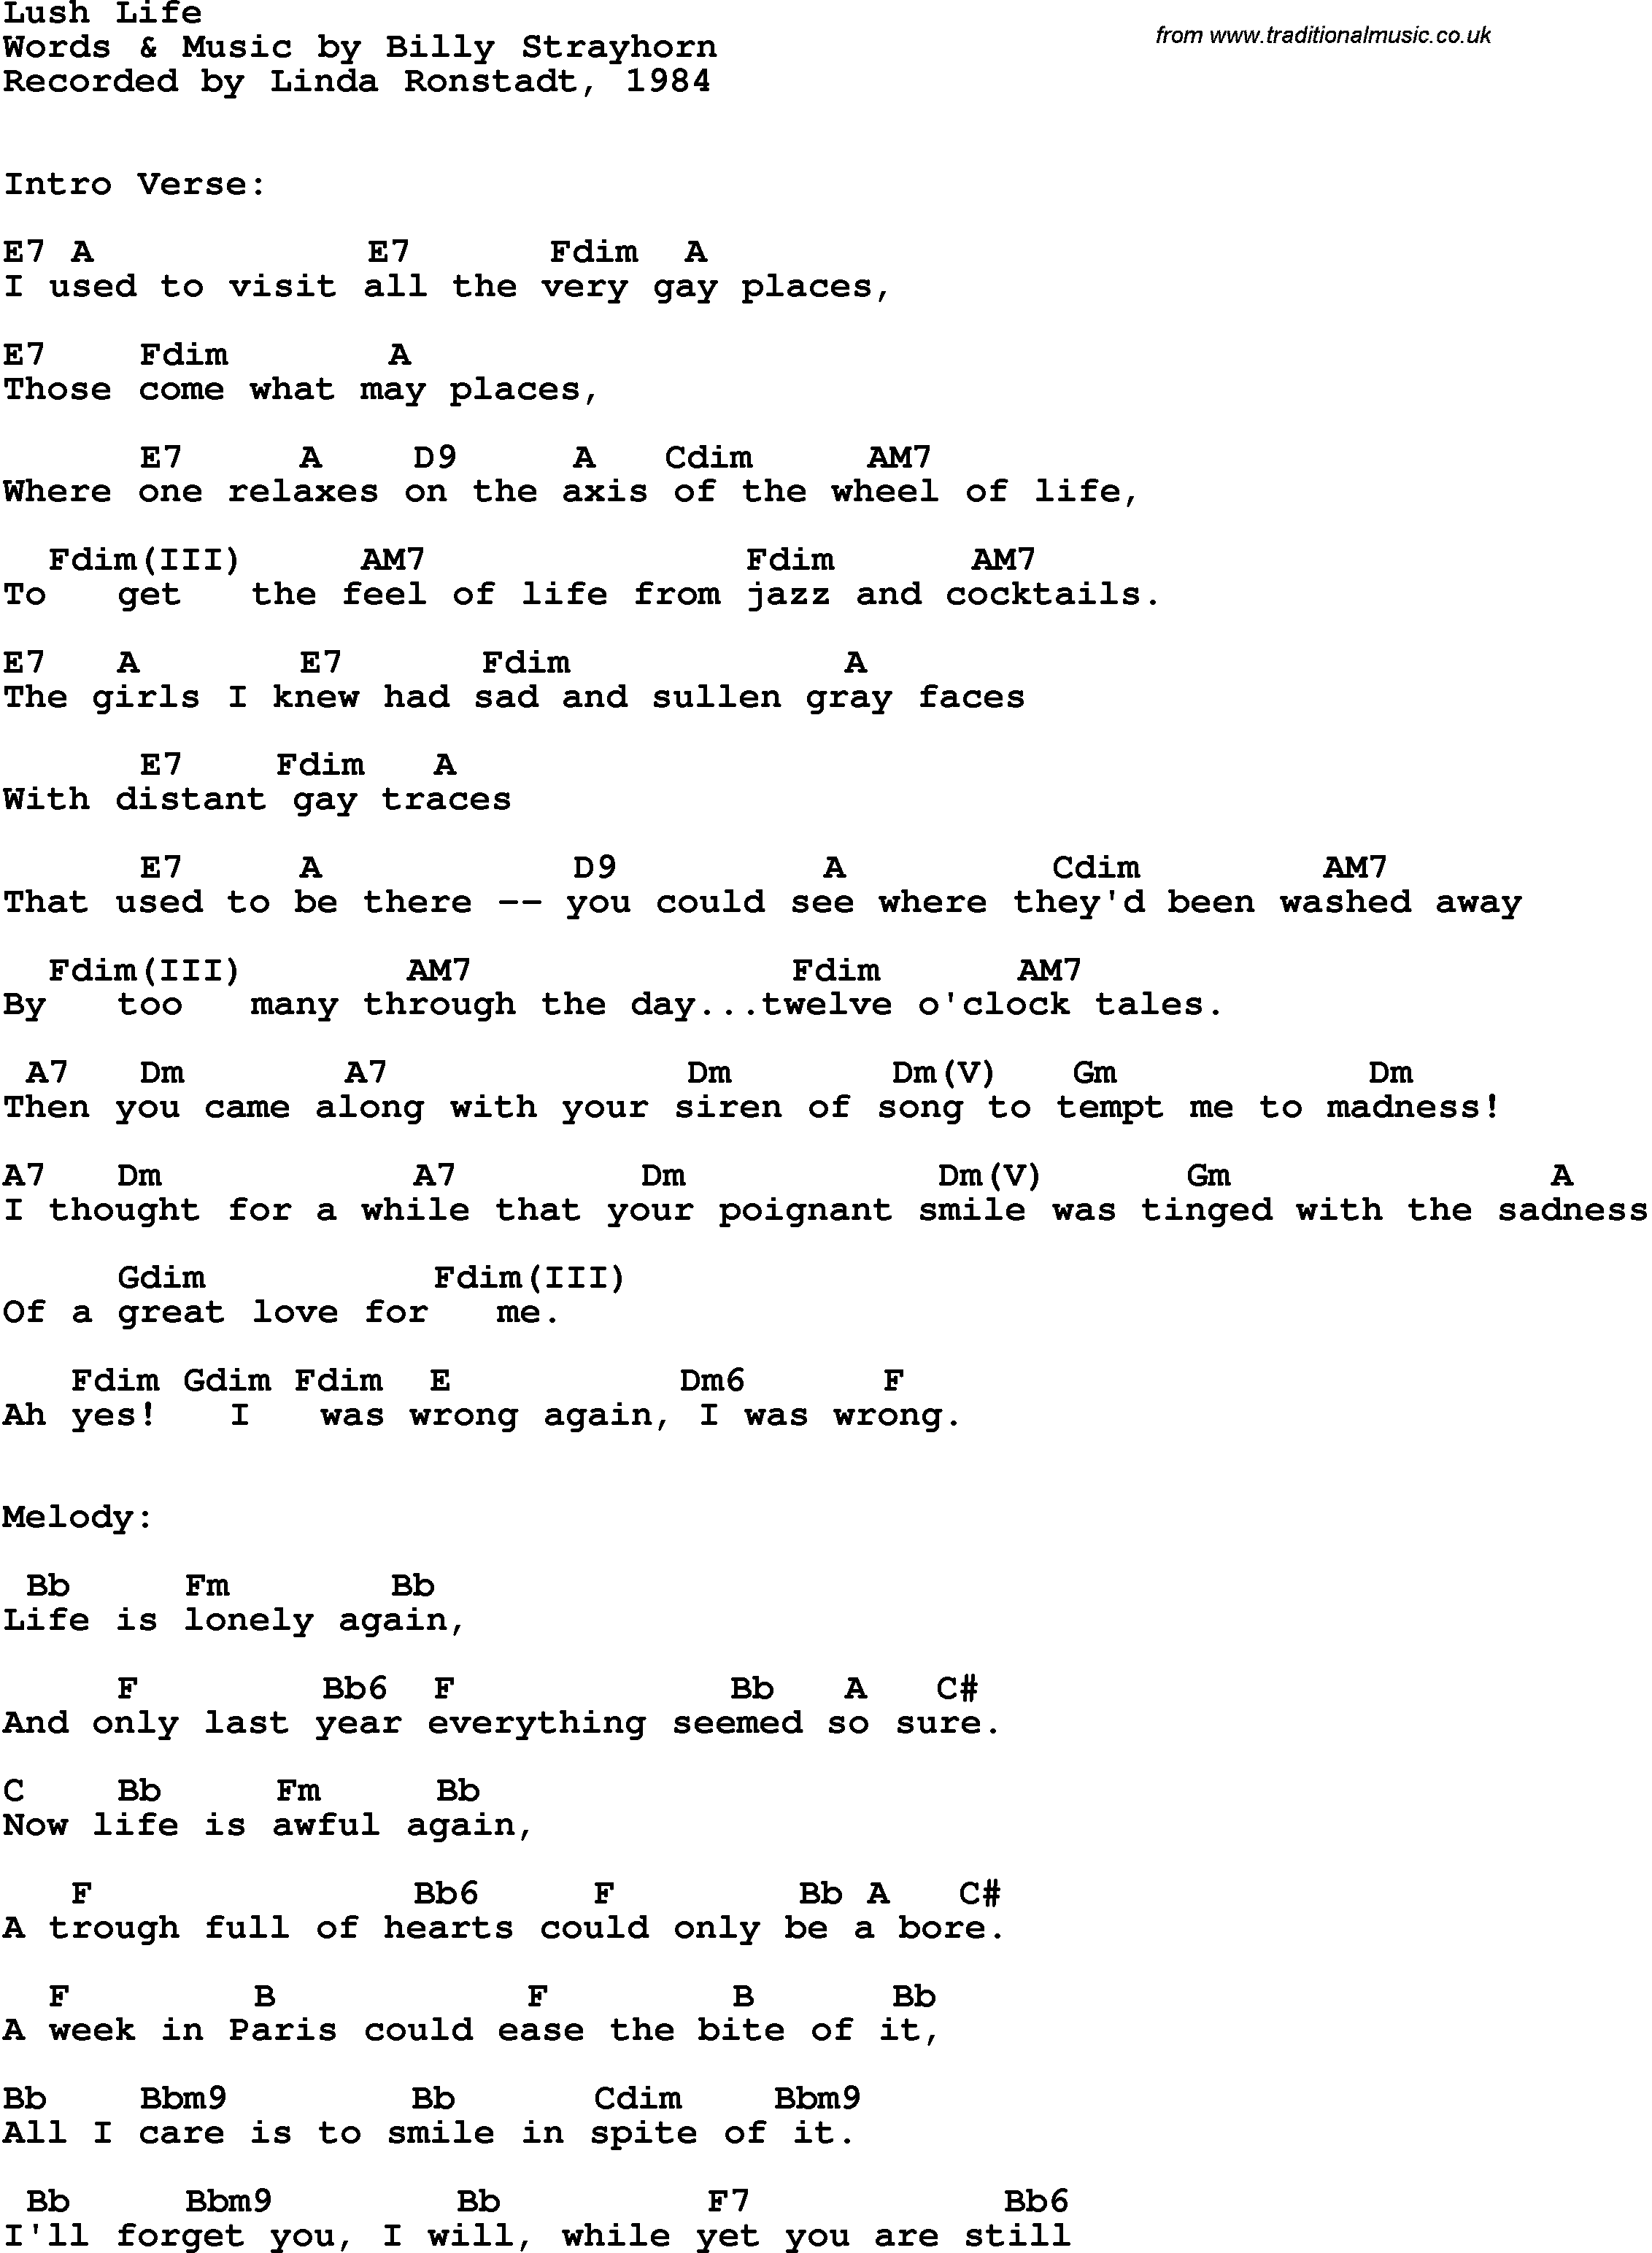 Song Lyrics with guitar chords for Lush Life - Linda Ronstadt, 1984